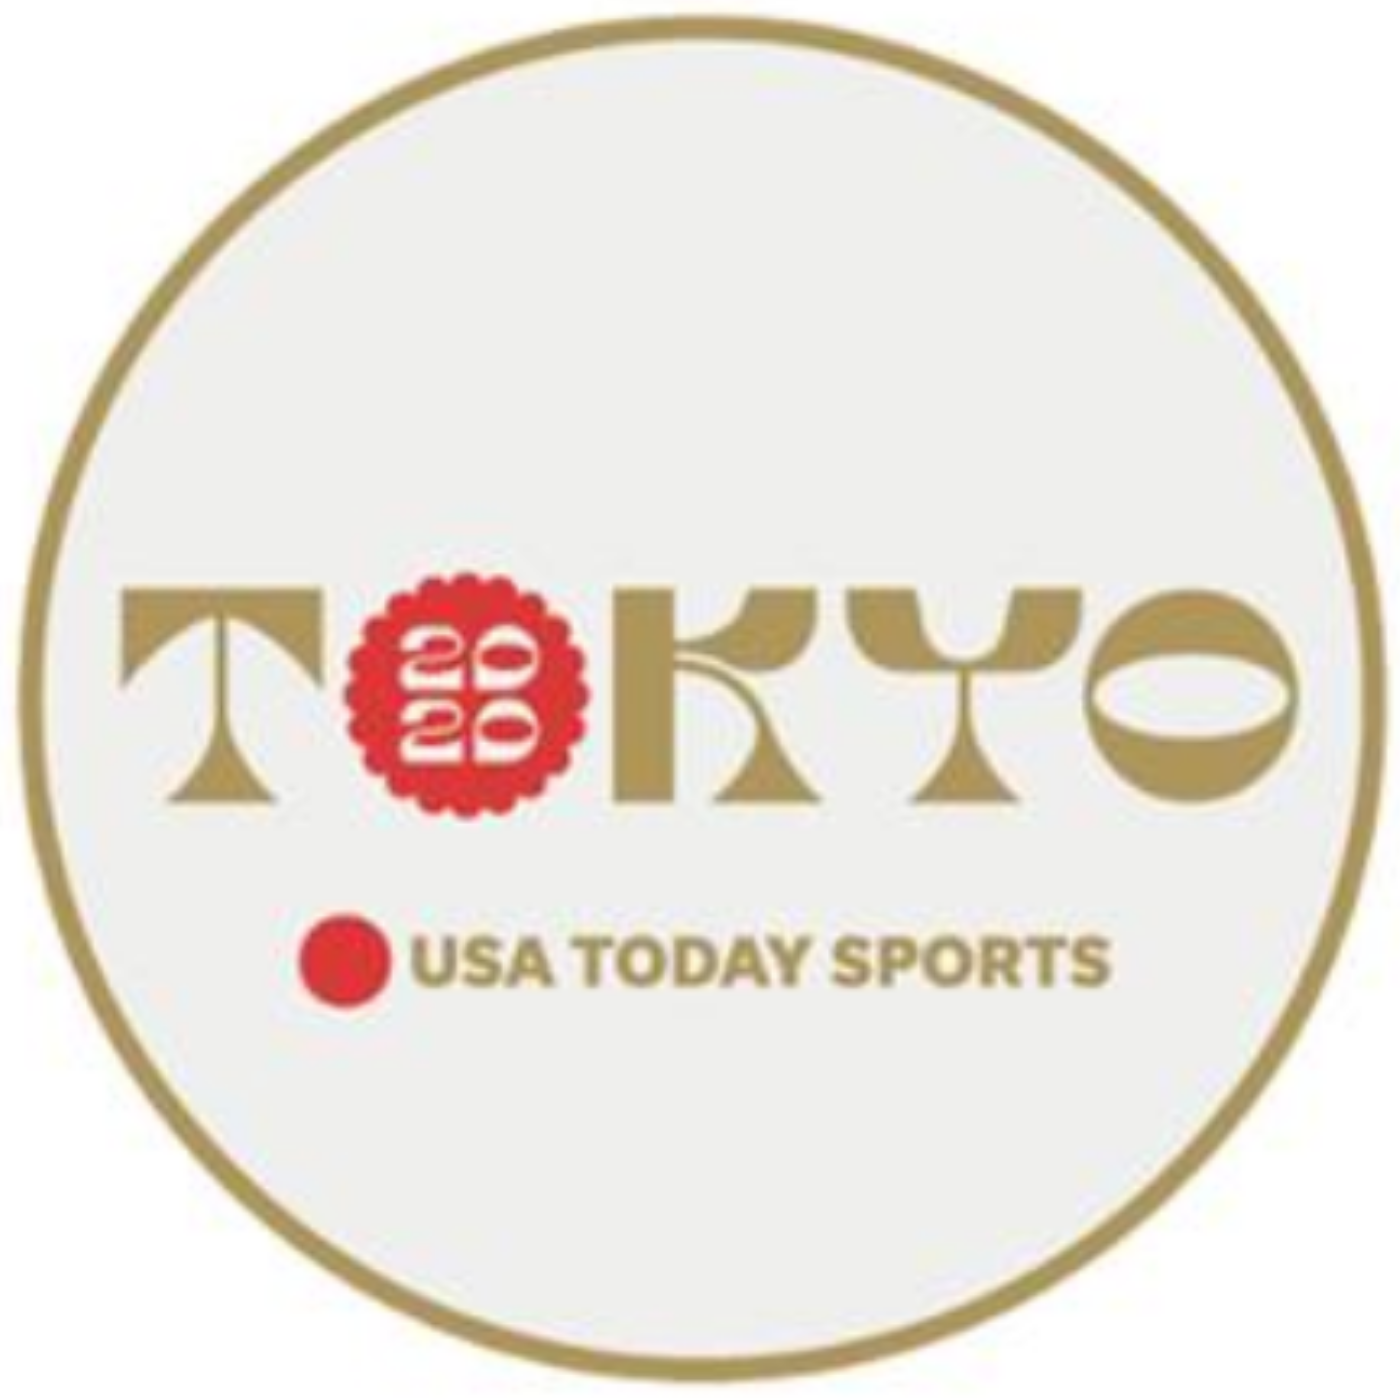 Coming Soon! USA TODAY SPORTS covers the Olympics in Tokyo!